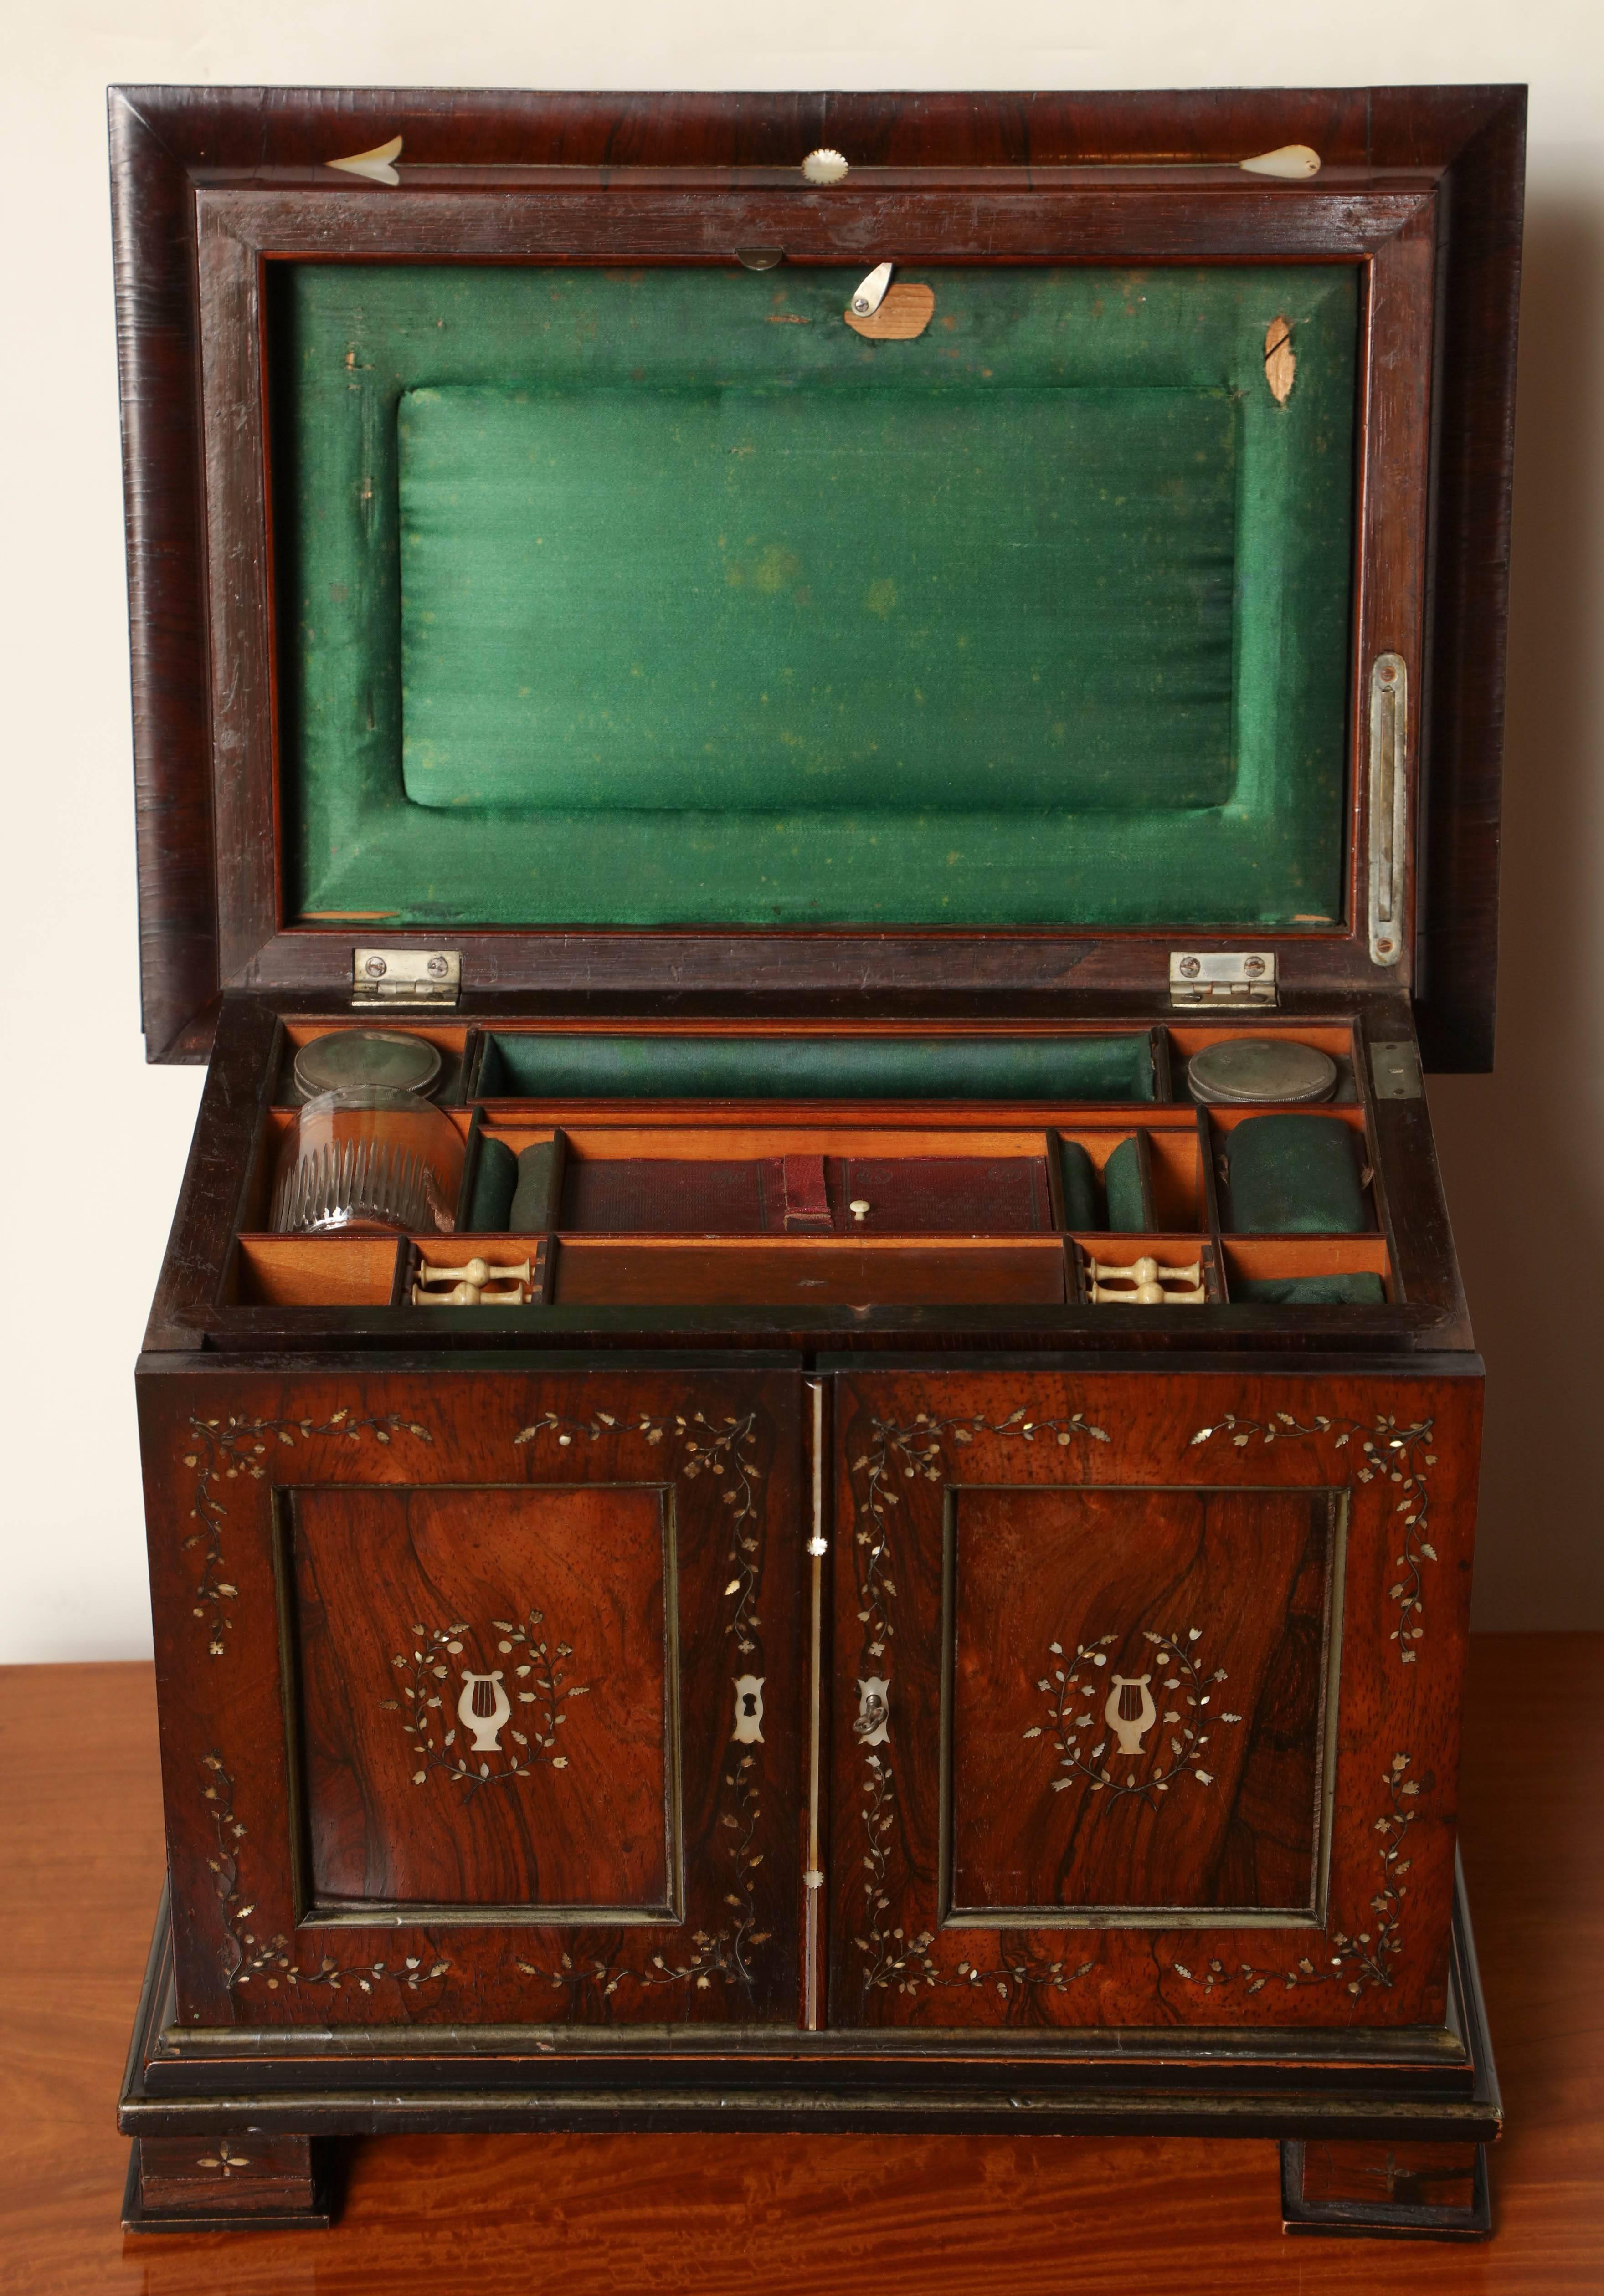 19th century hardwood and mother-of-pearl inlaid necessaire.
With a top hinged lid, two doors and three working drawers.